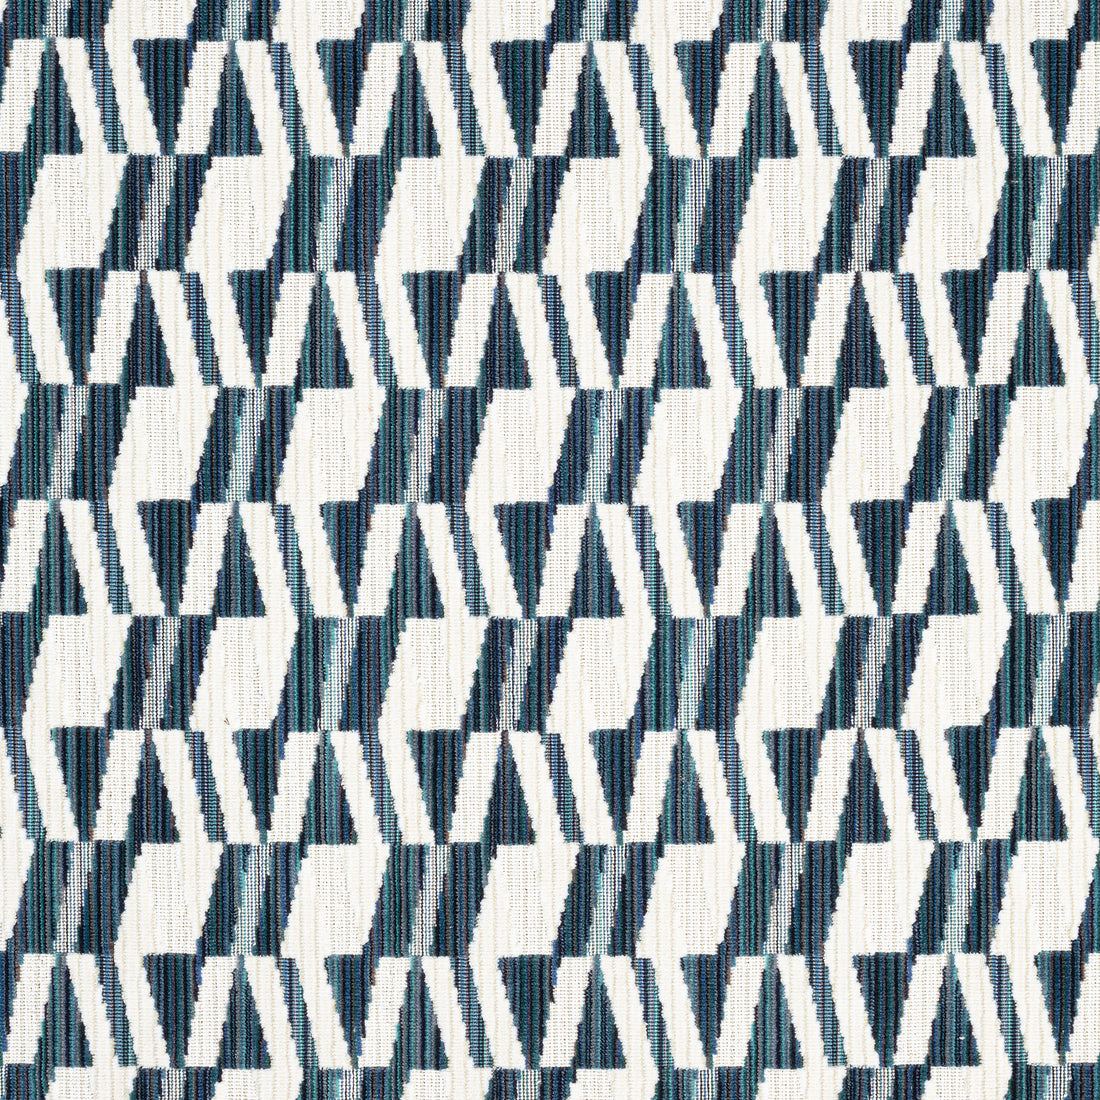 Bossa Nova Velvet fabric in peacock color - pattern number W72810 - by Thibaut in the Woven Resource 13: Fusion Velvets collection